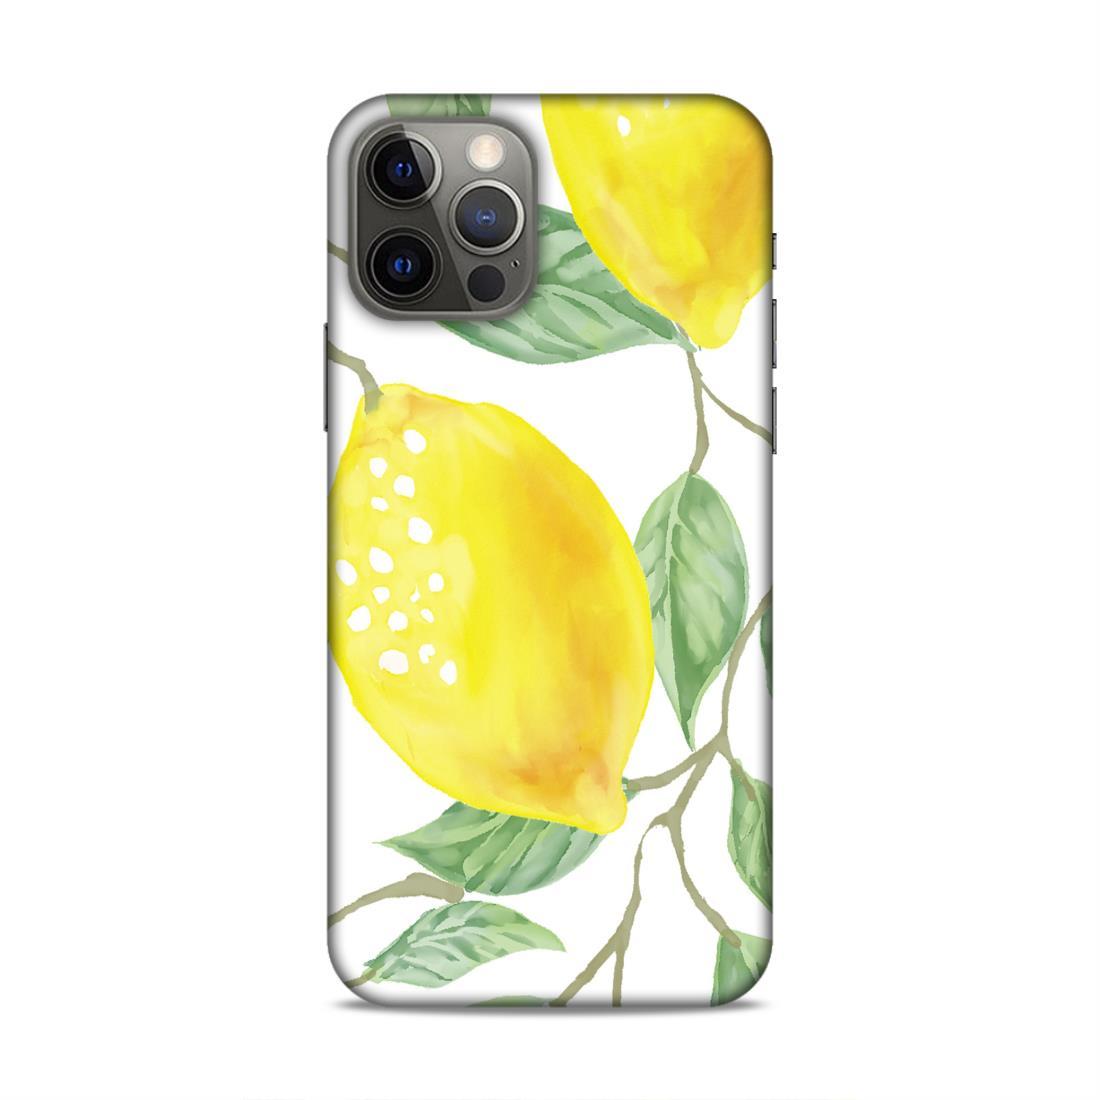 Mango Waterpainting iPhone 12 Pro Mobile Back Case